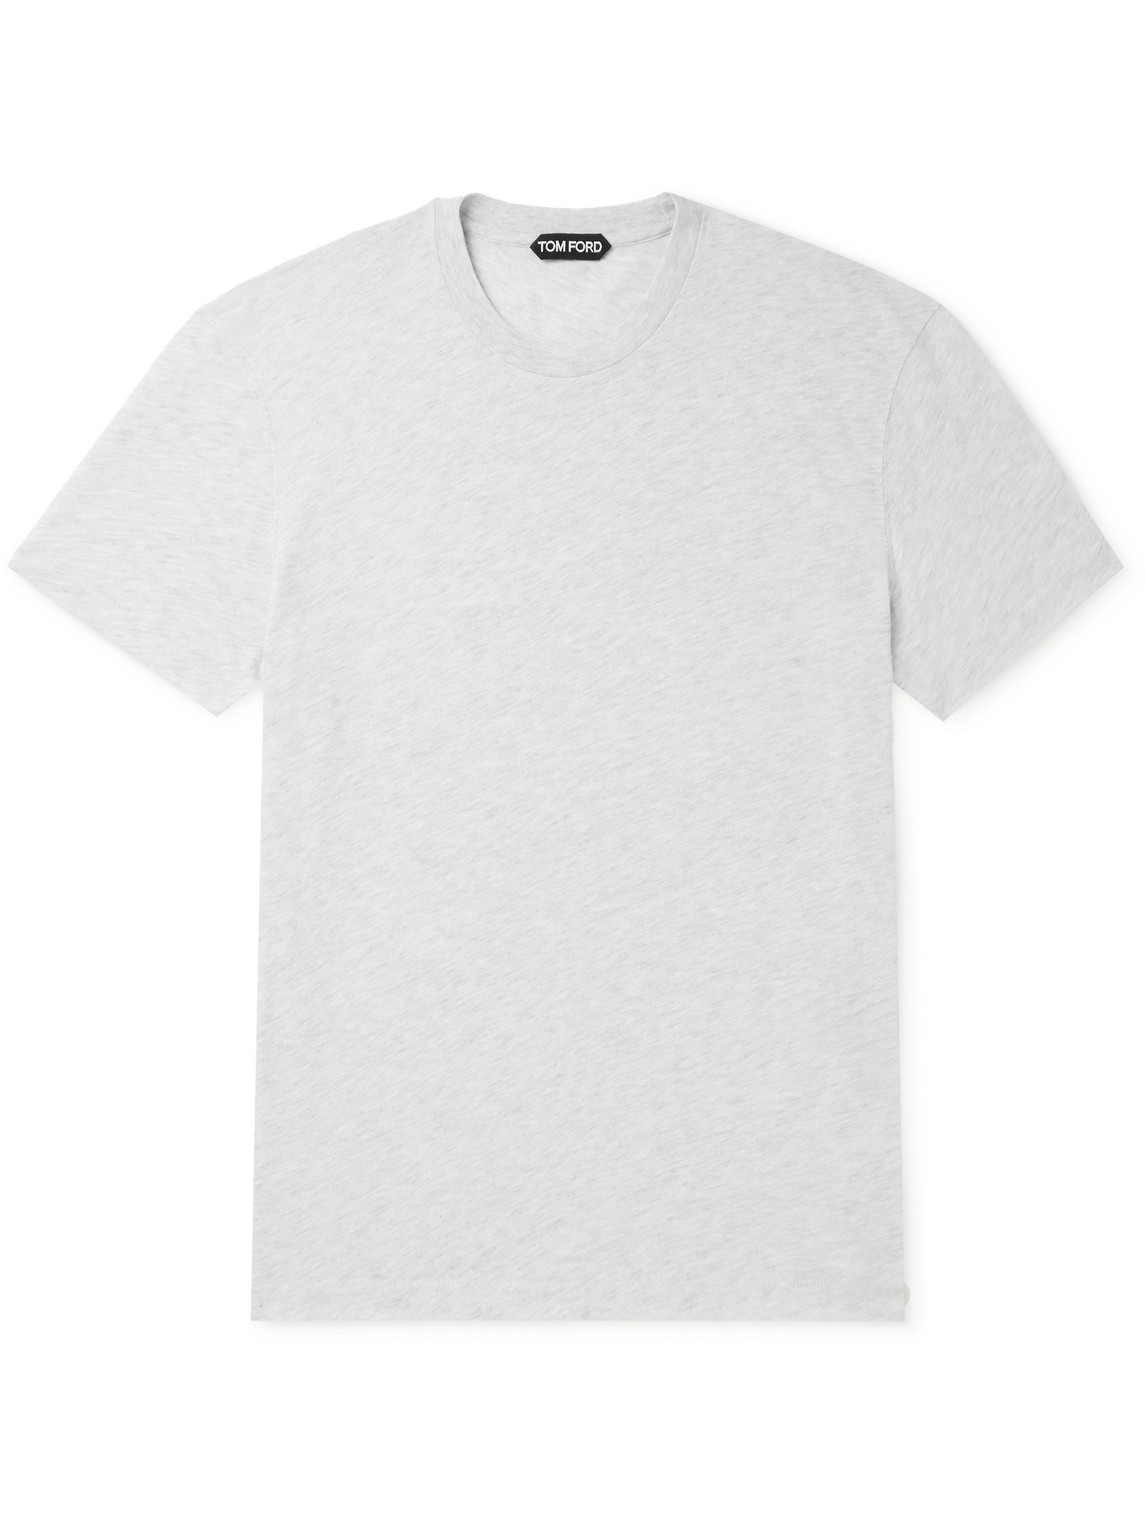 Tom Ford Cotton-blend Jersey T-shirt In Grey